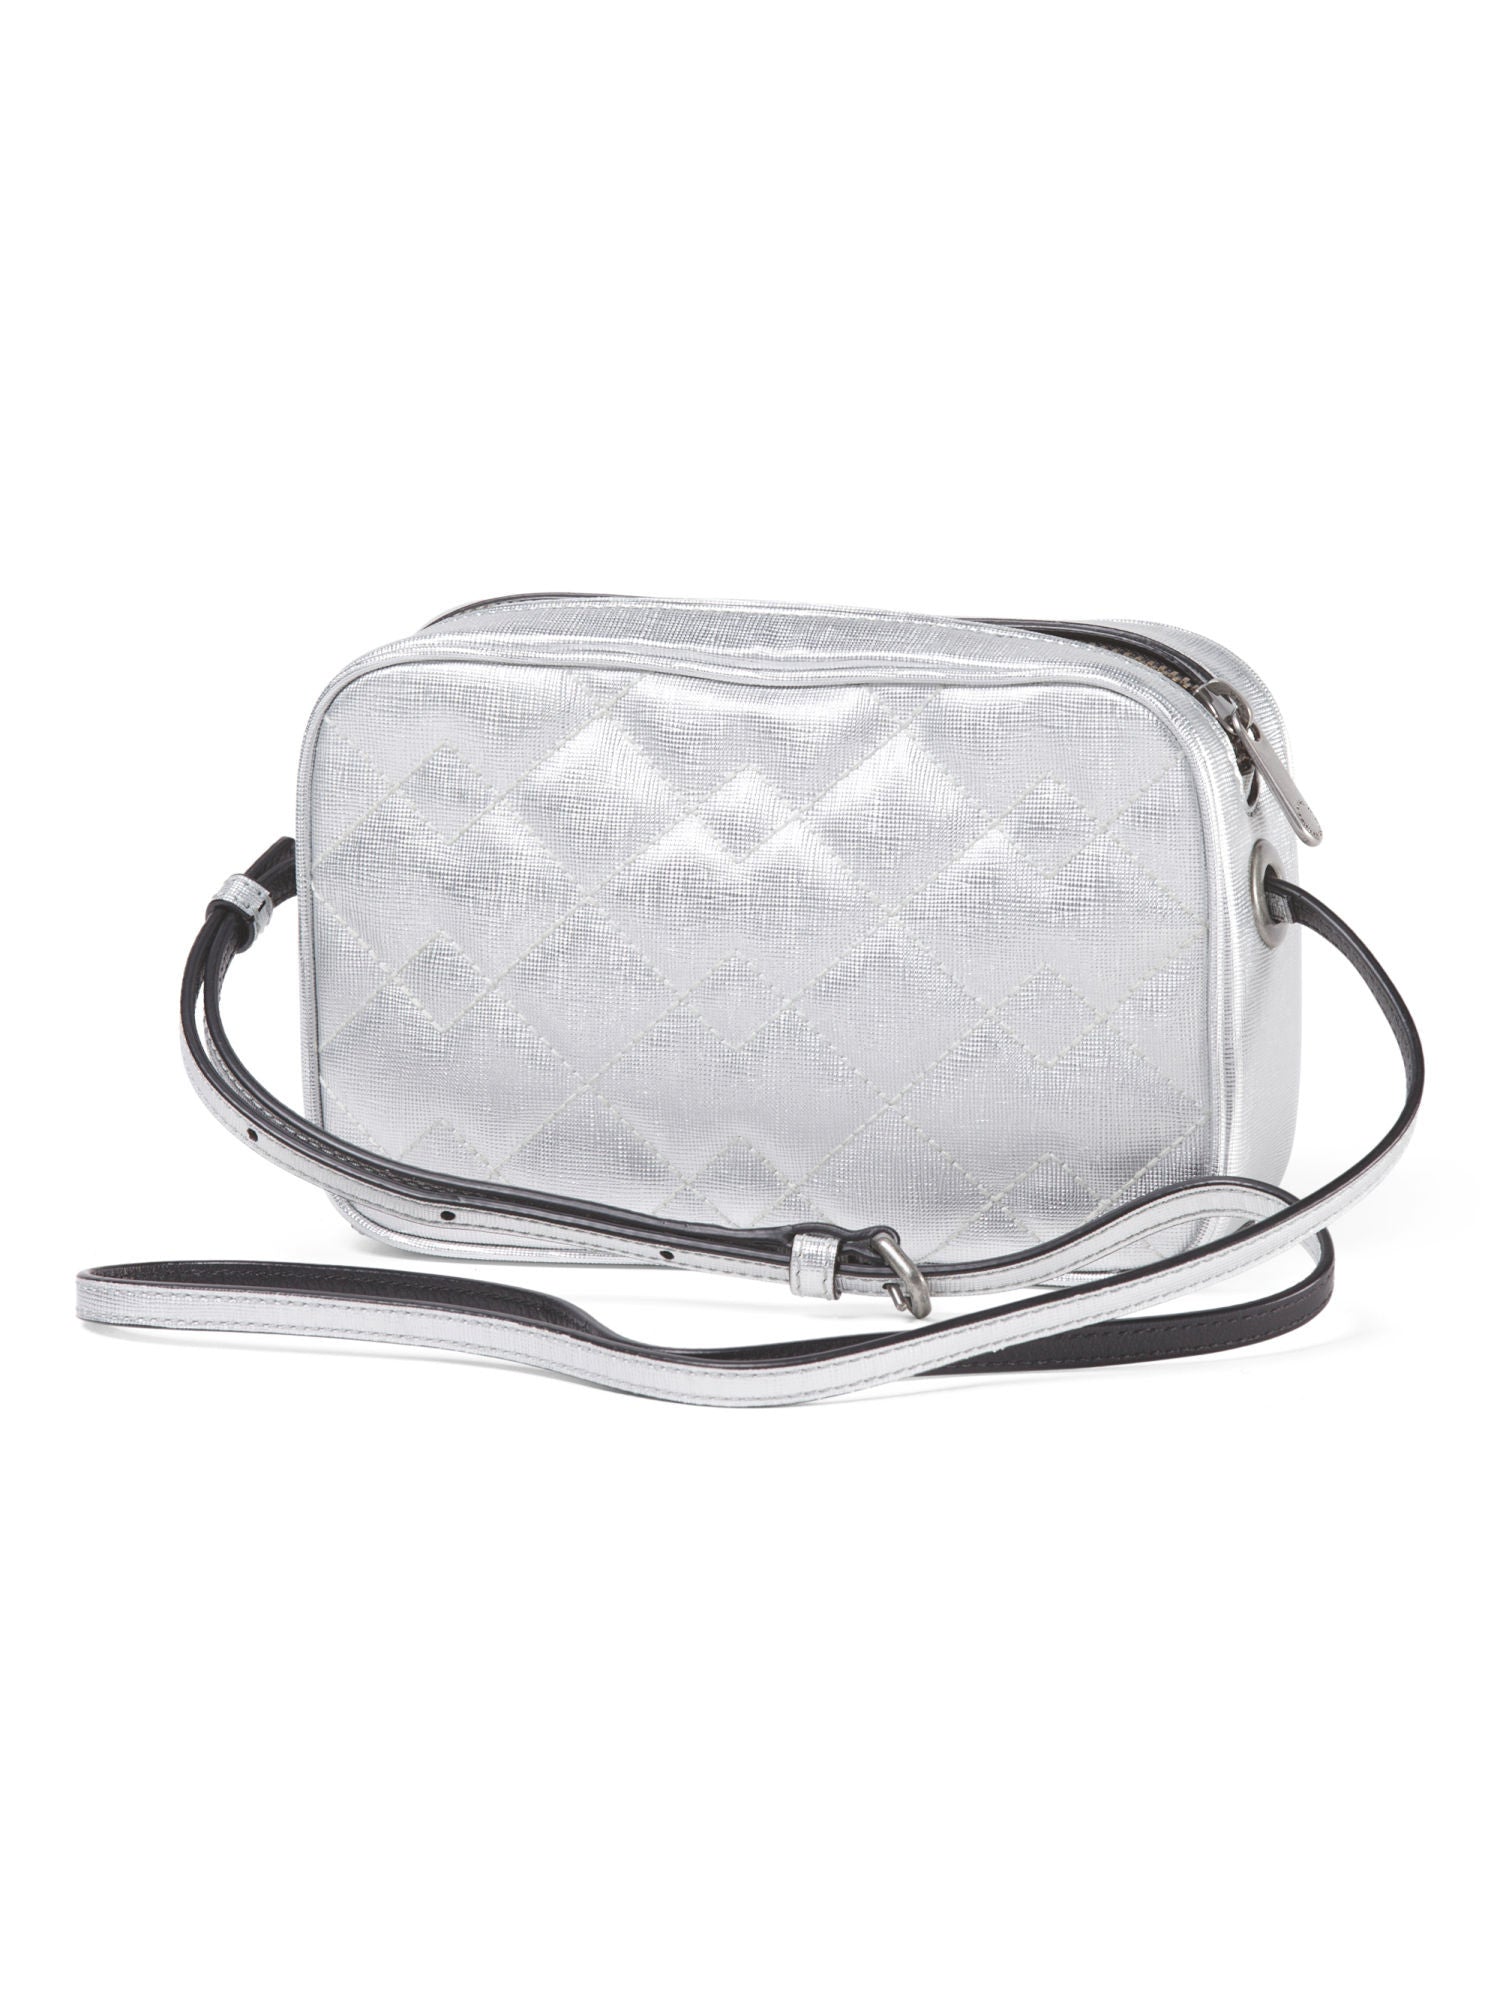 MARC JACOBS Silver Crossbody Bags